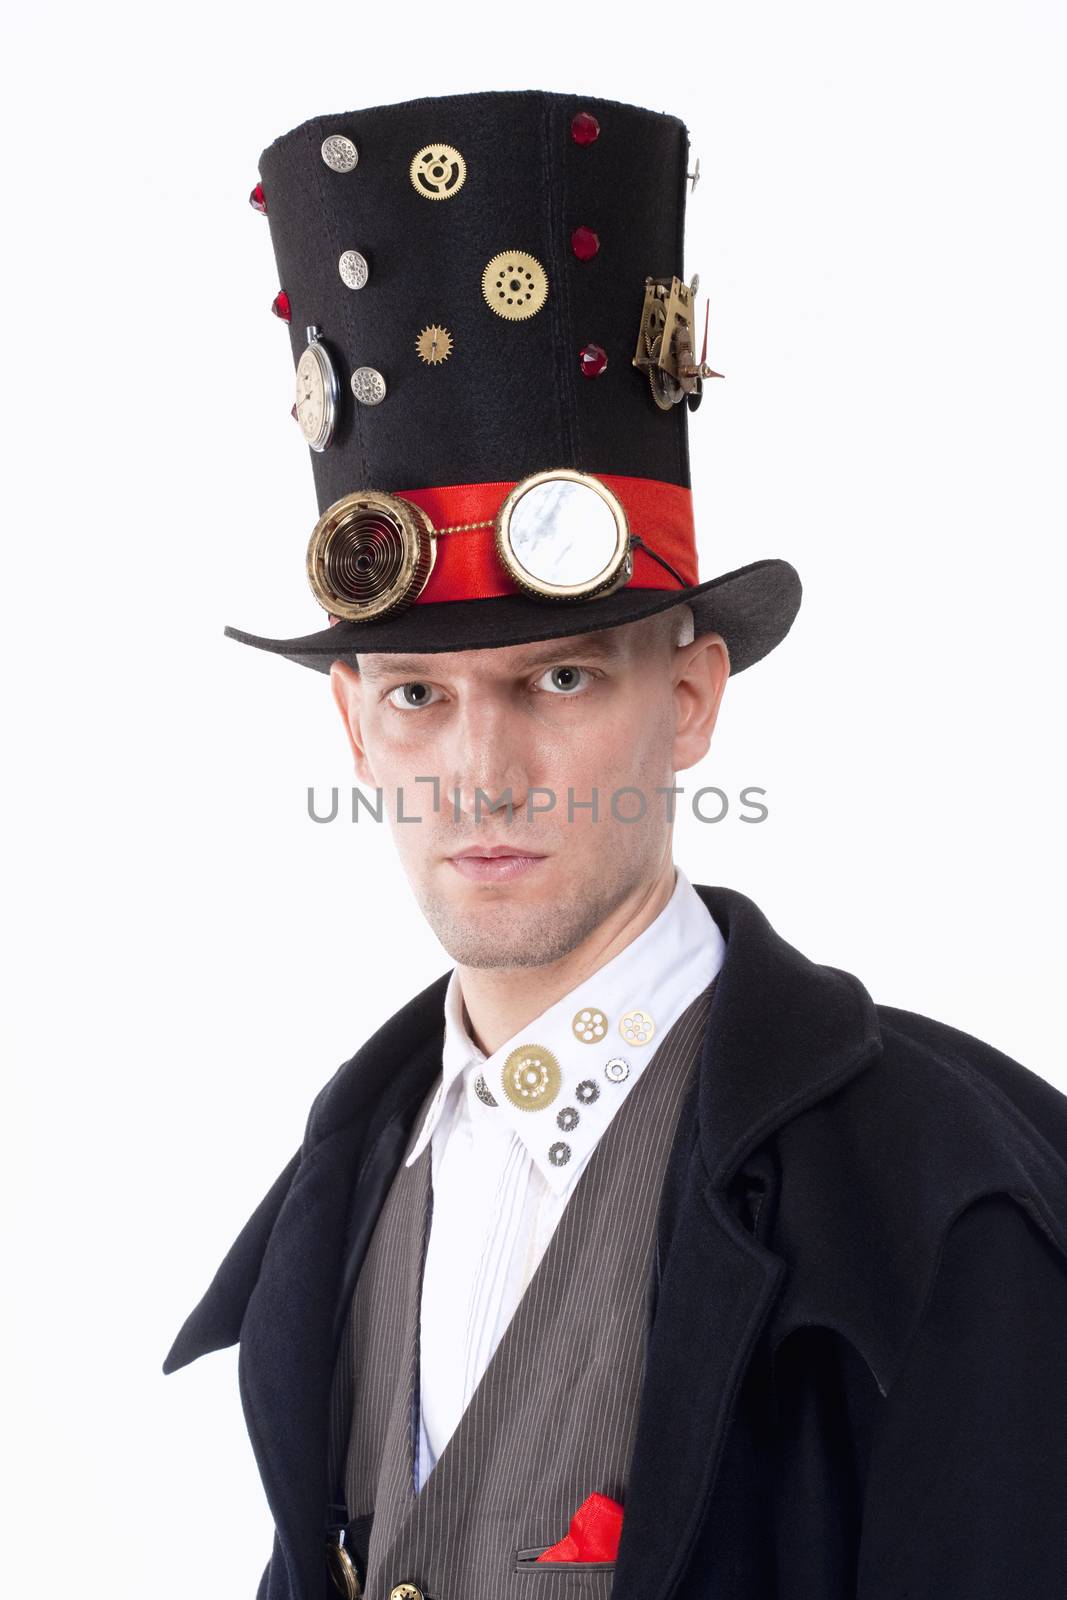 Magician with High Hat, Long Coat and Clock Parts Details by courtyardpix